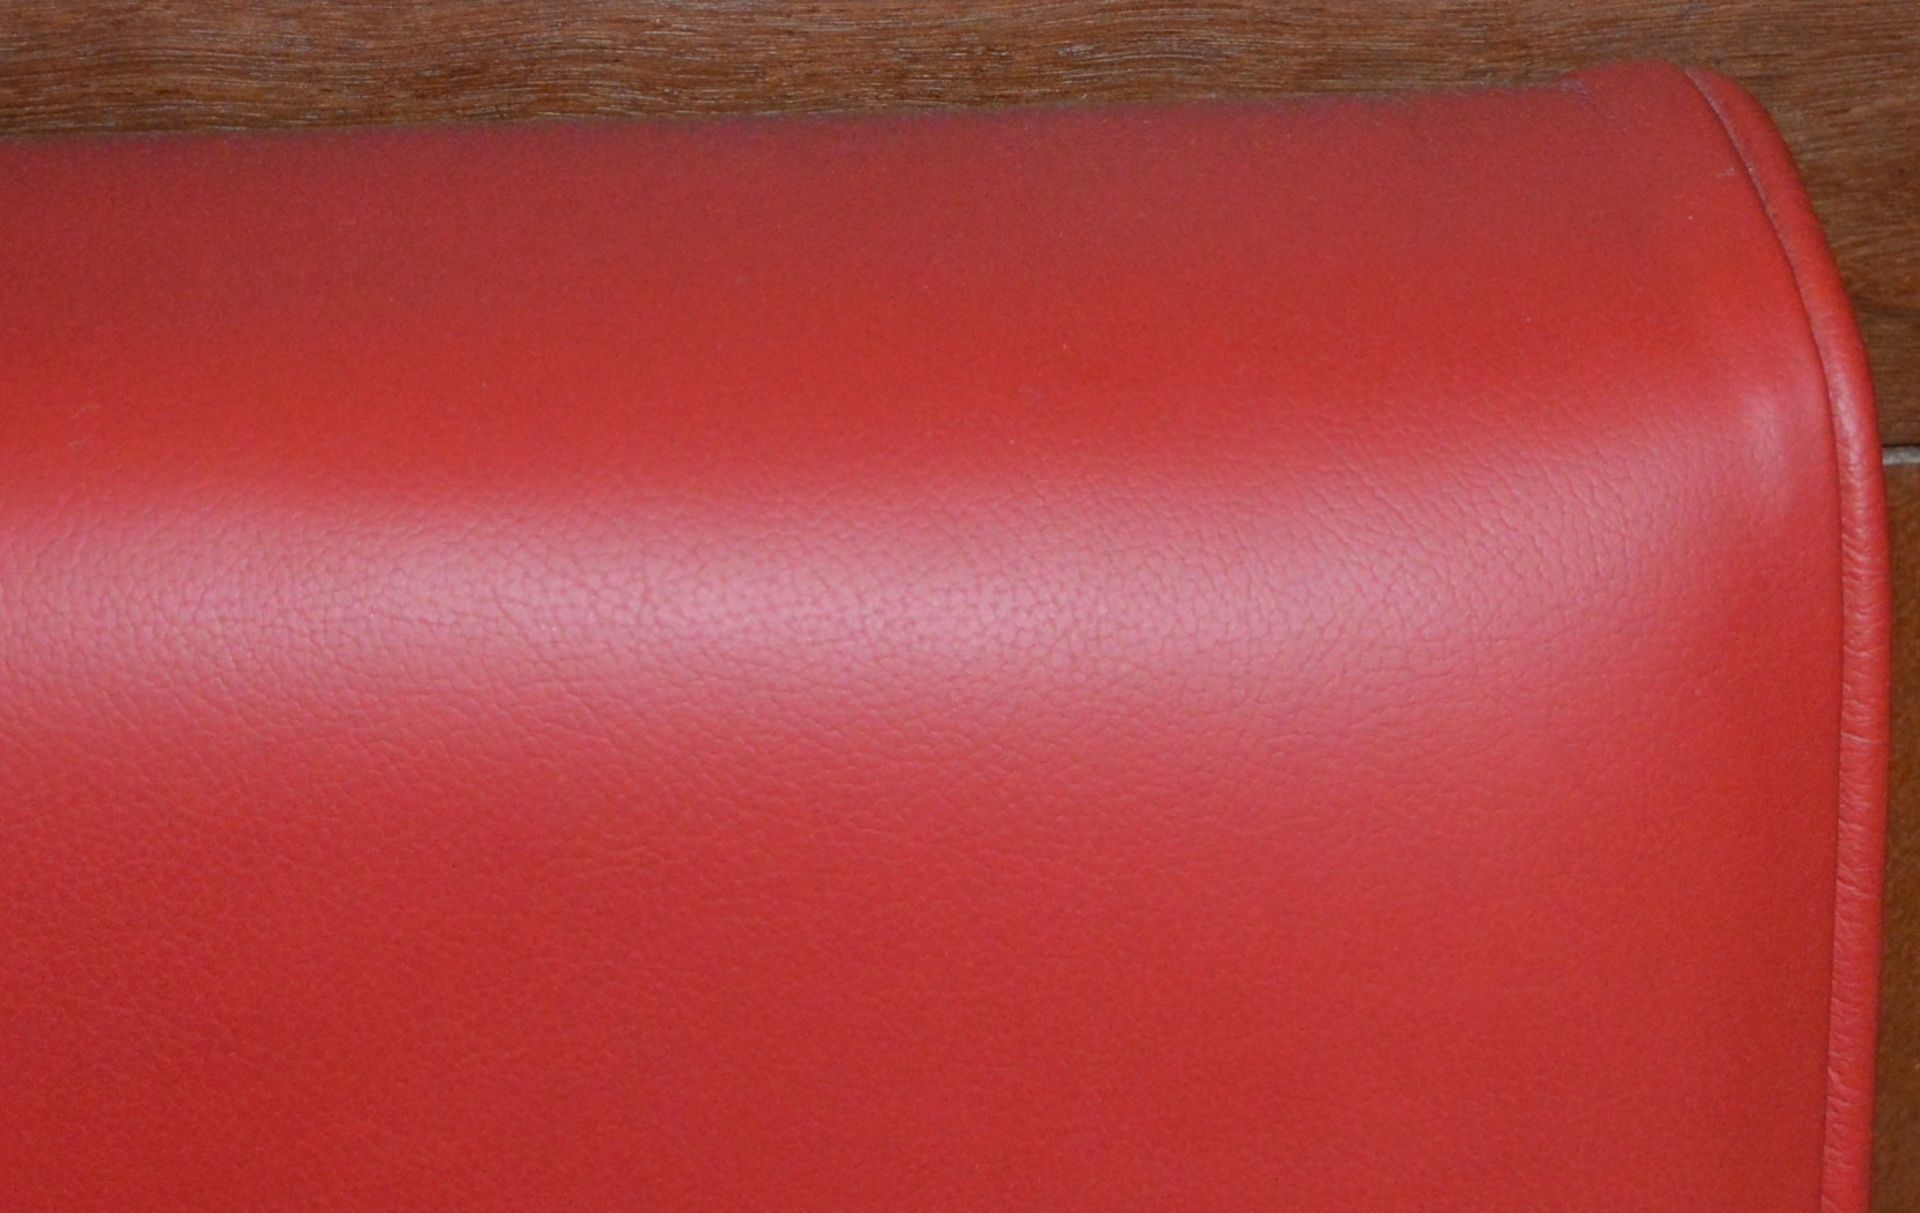 1 x High Back Seating Bench Upholstered in Red Leather With Oak Base and Surround - Image 5 of 5